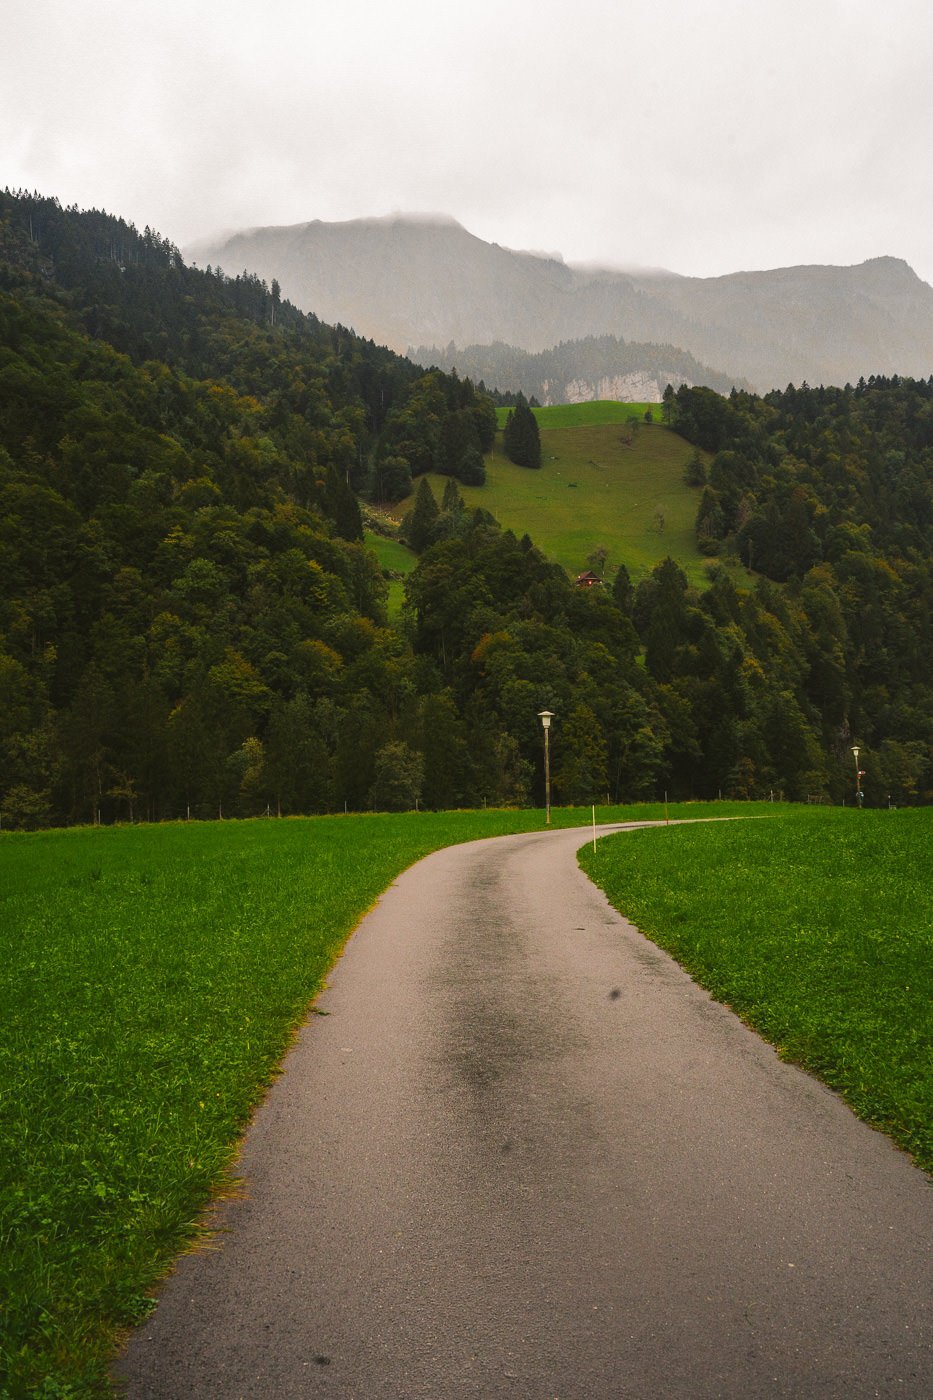 a winding road in the middle of a lush green field.